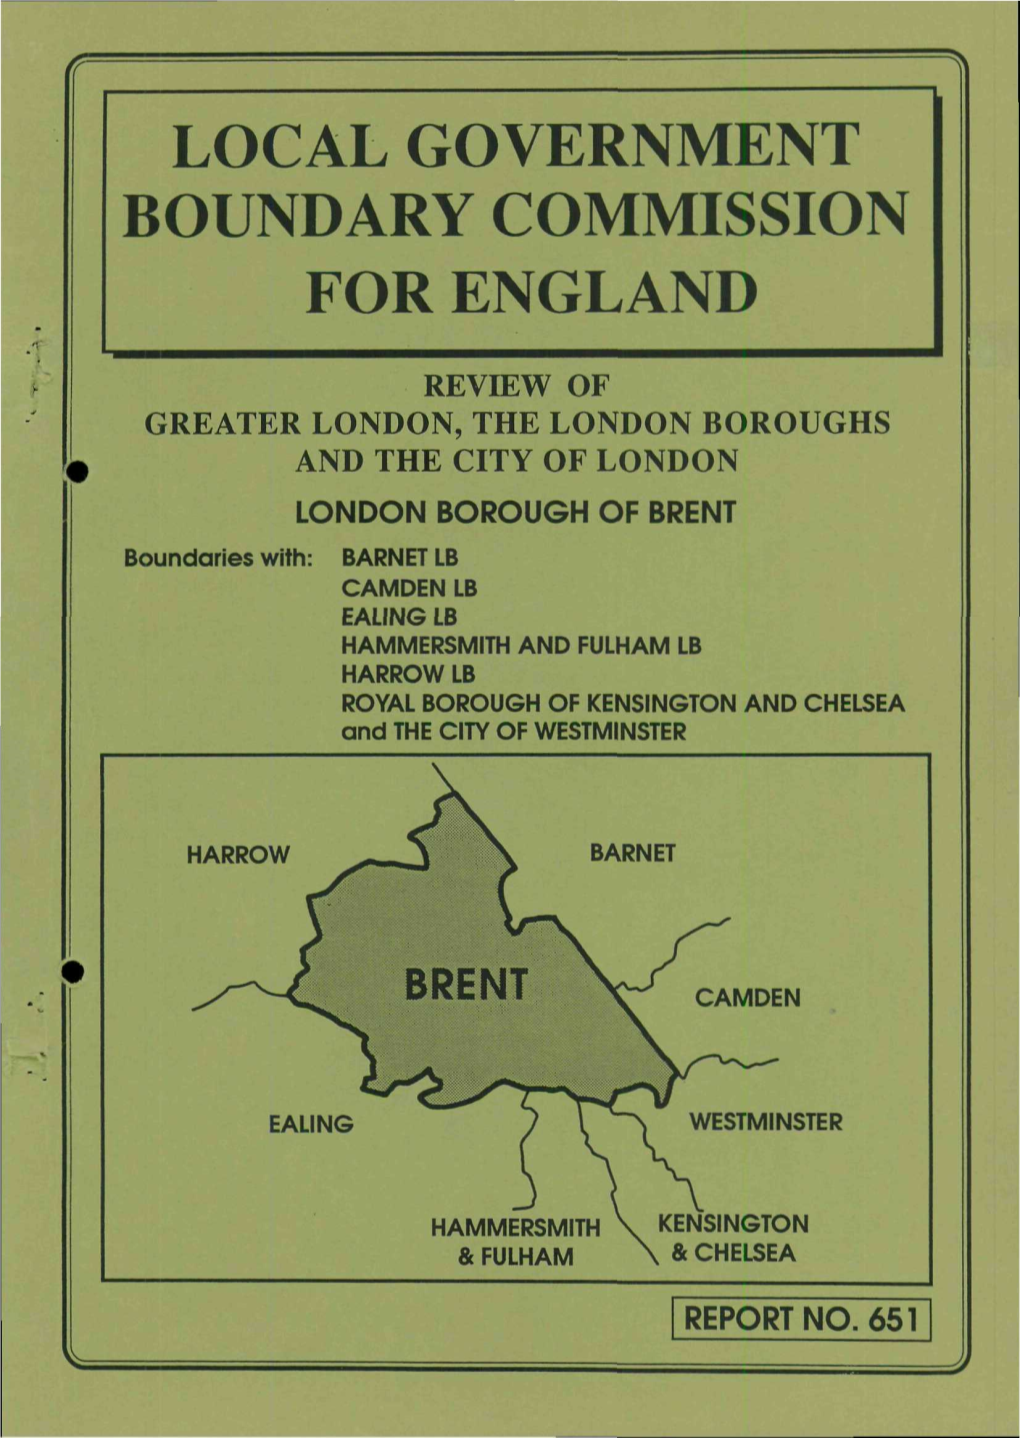 BRENT Boundaries With: BARNET IB CAMDEN LB EALING LB HAMMERSMITH and FULHAM LB HARROW LB ROYAL BOROUGH of KENSINGTON and CHELSEA and the CITY of WESTMINSTER